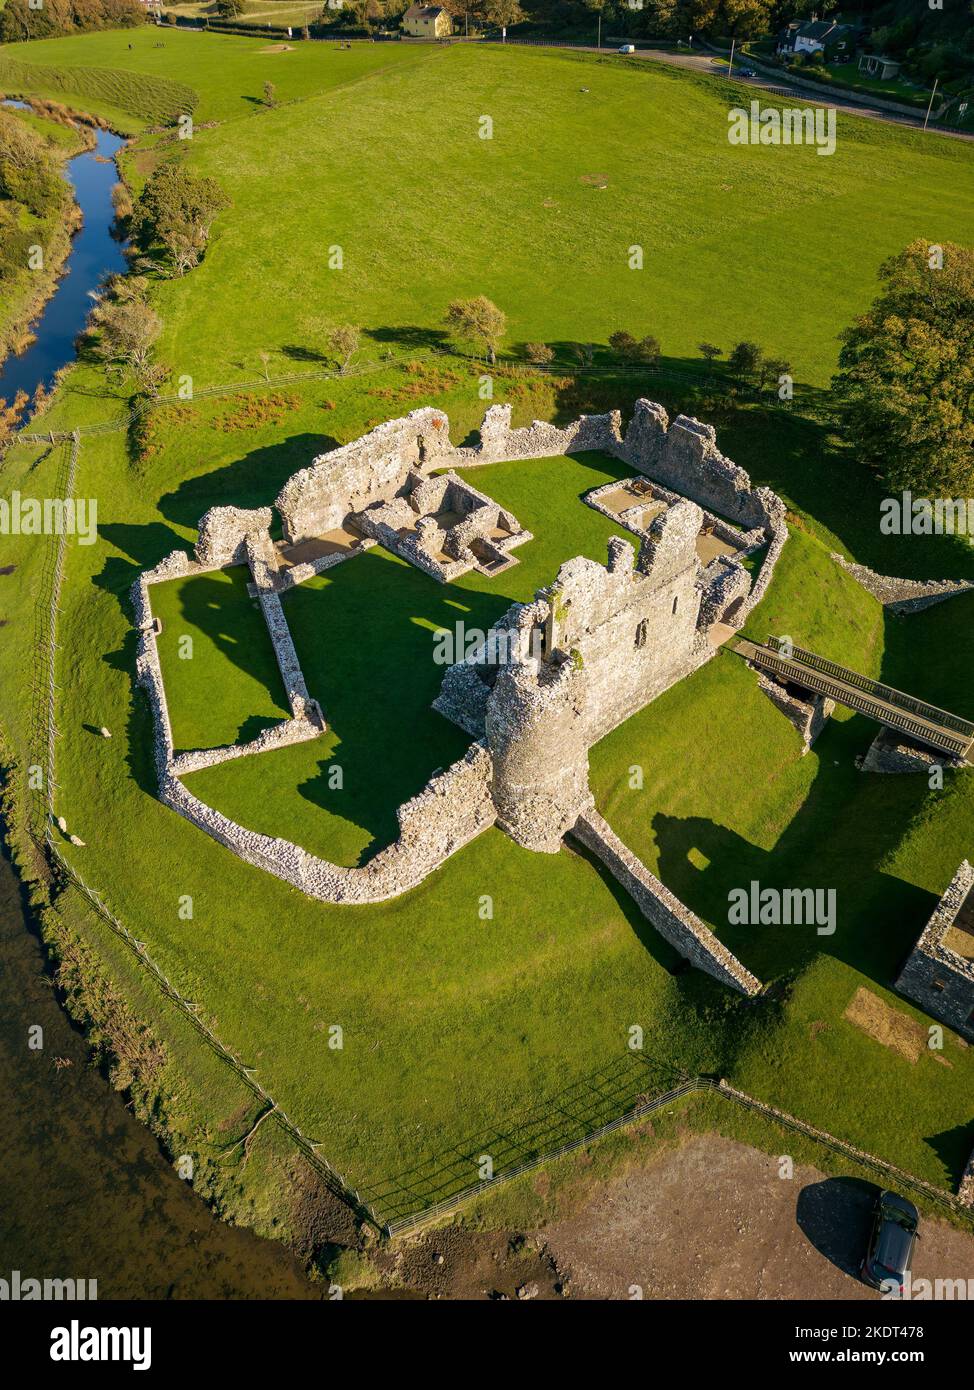 Aerial view of the ruins of the 12th century Ogmore Castle, Glamorgan, Wales Stock Photo